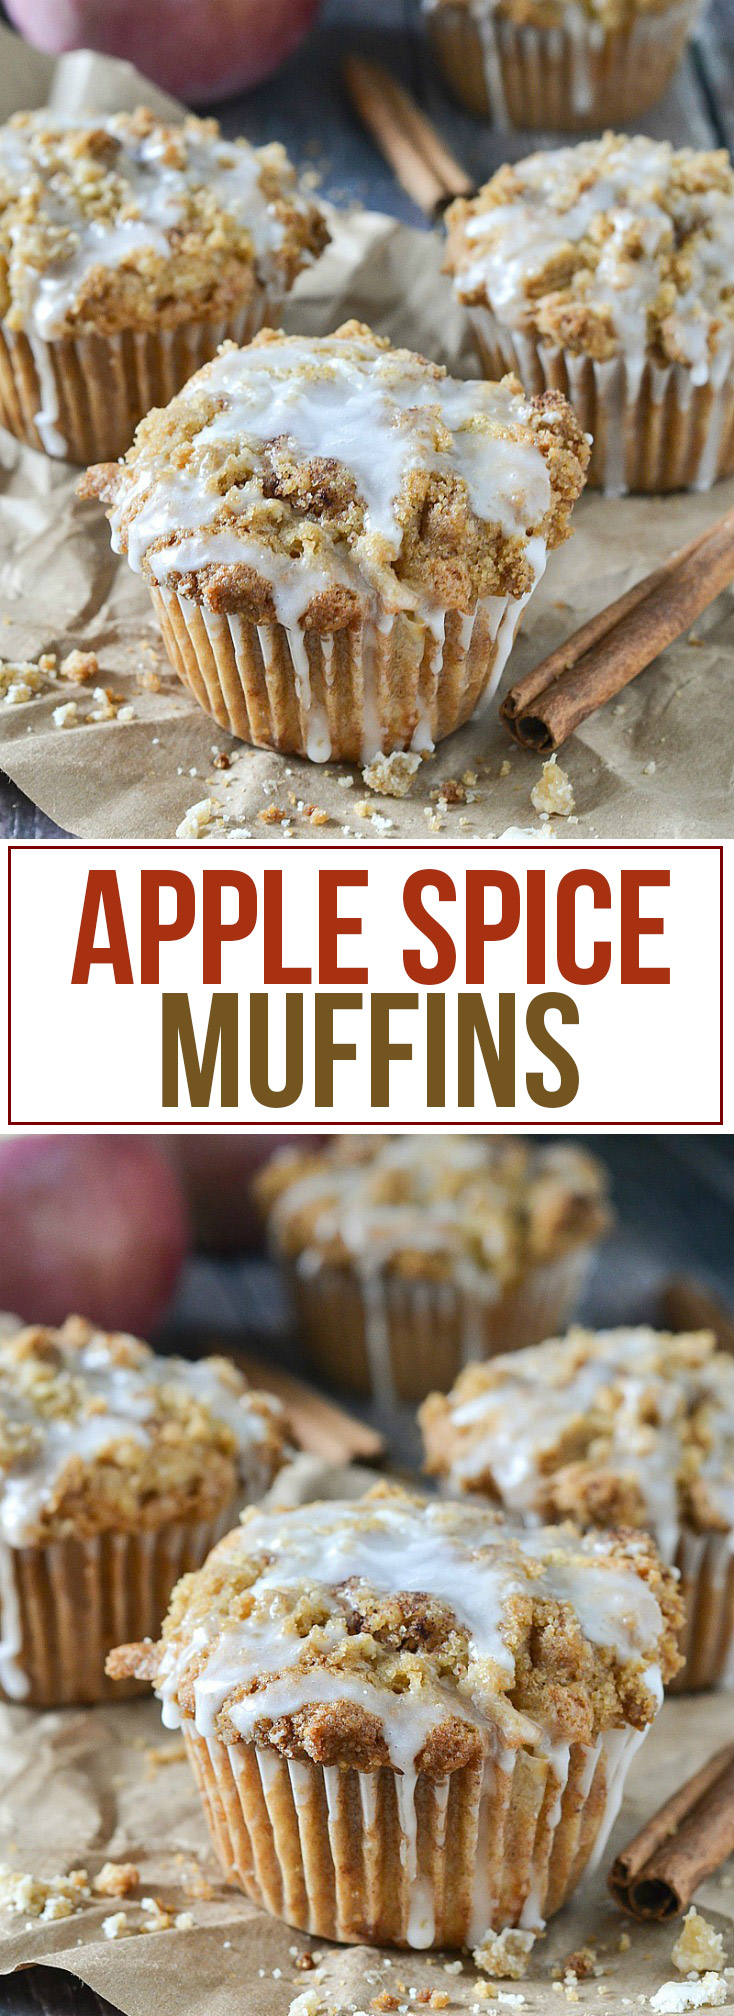 Apple Spice Muffins from www.motherthyme.com